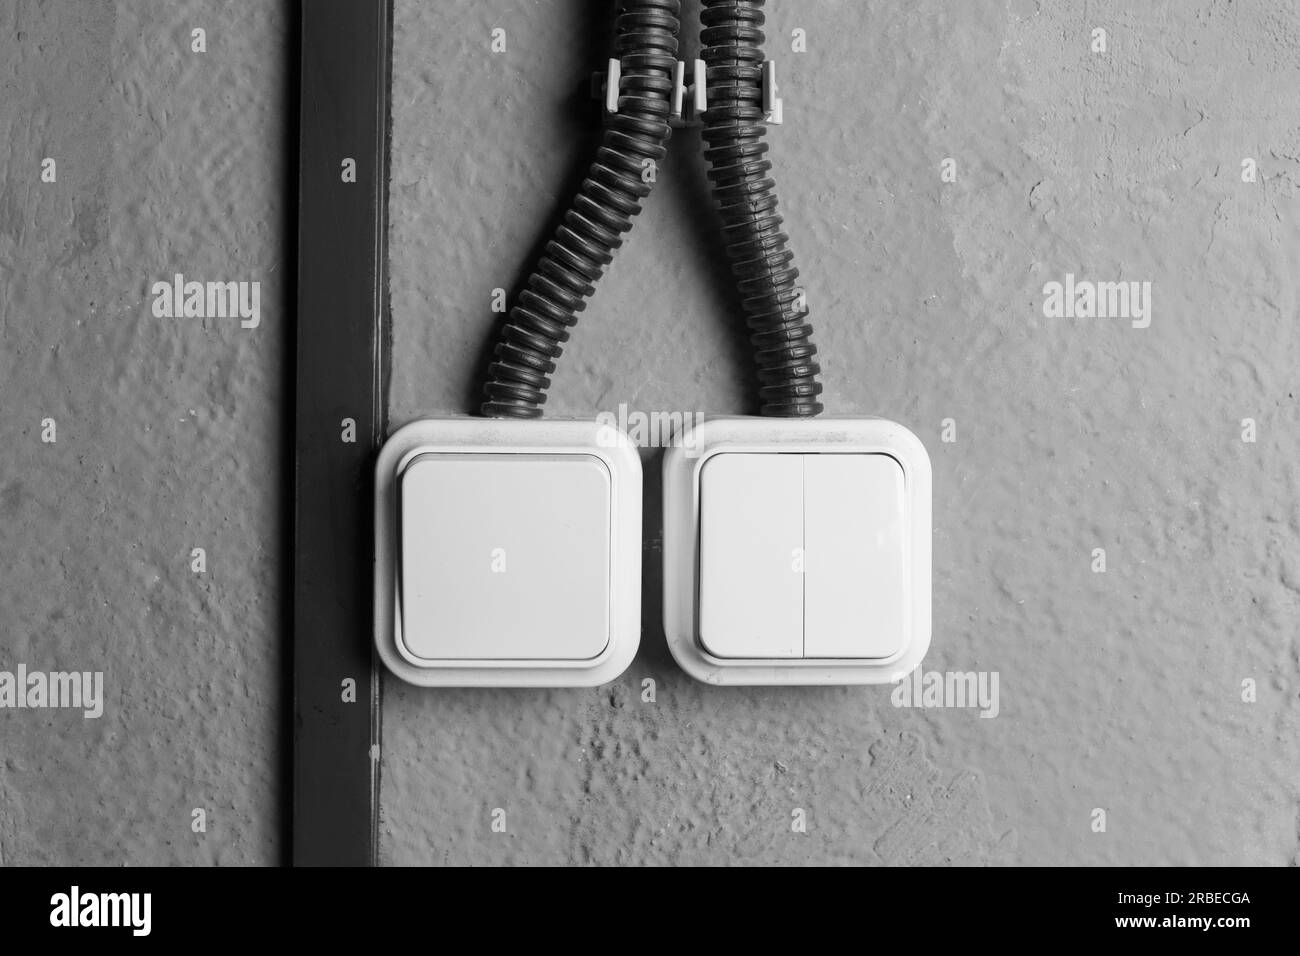 Light switch toggle power press button energy off electricity turn electric wall. Stock Photo